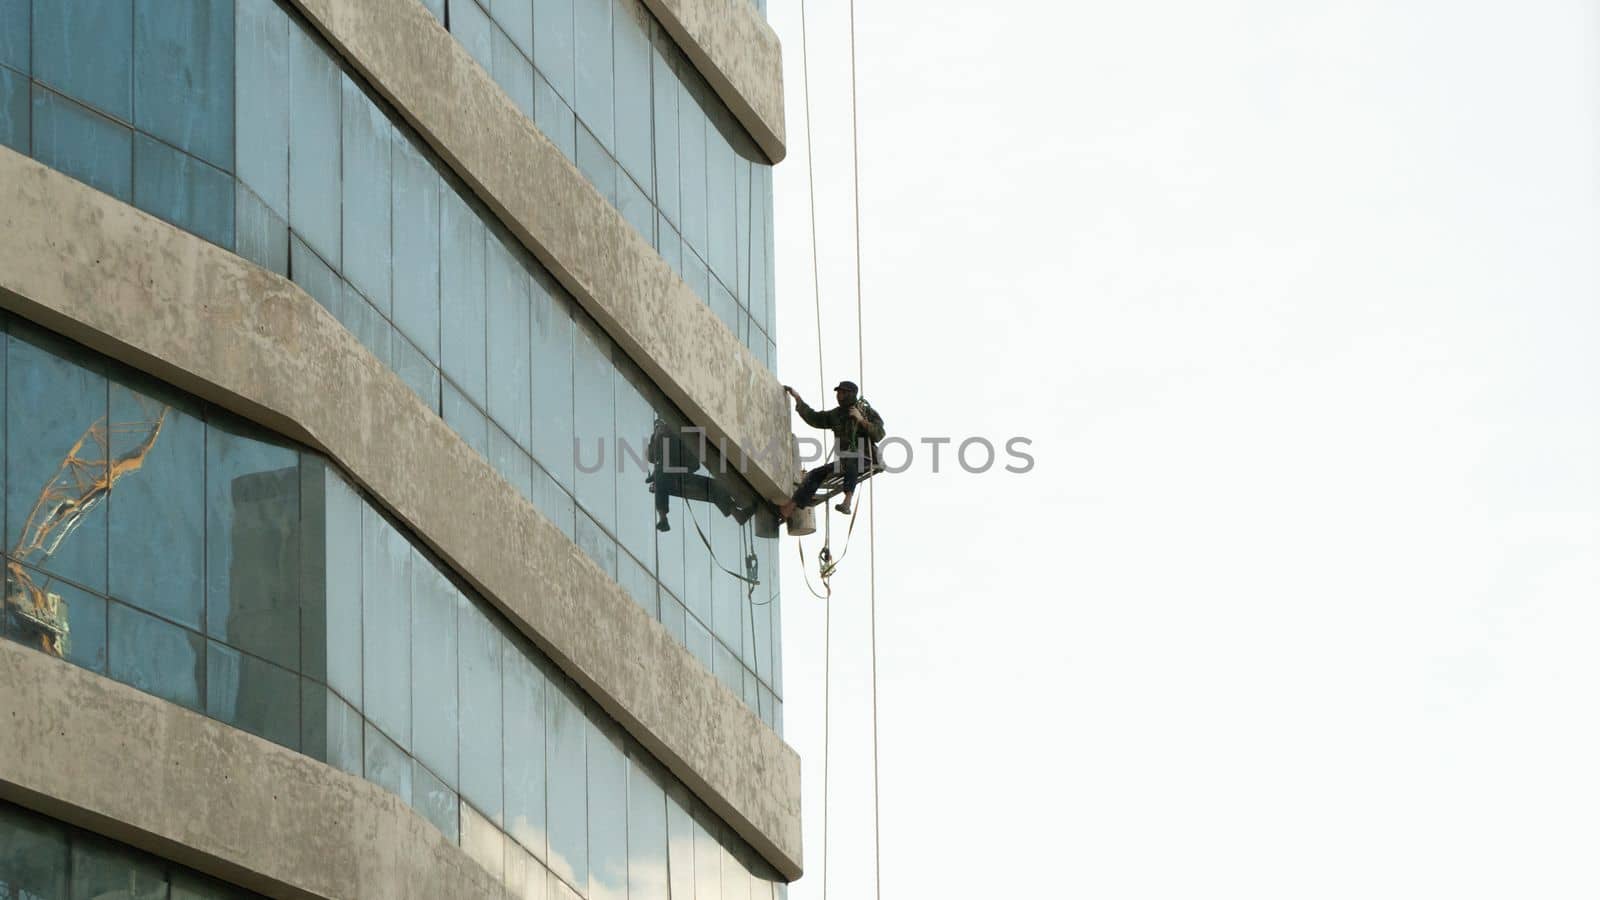 High-altitude work of an industrial climber on a building. High quality photo